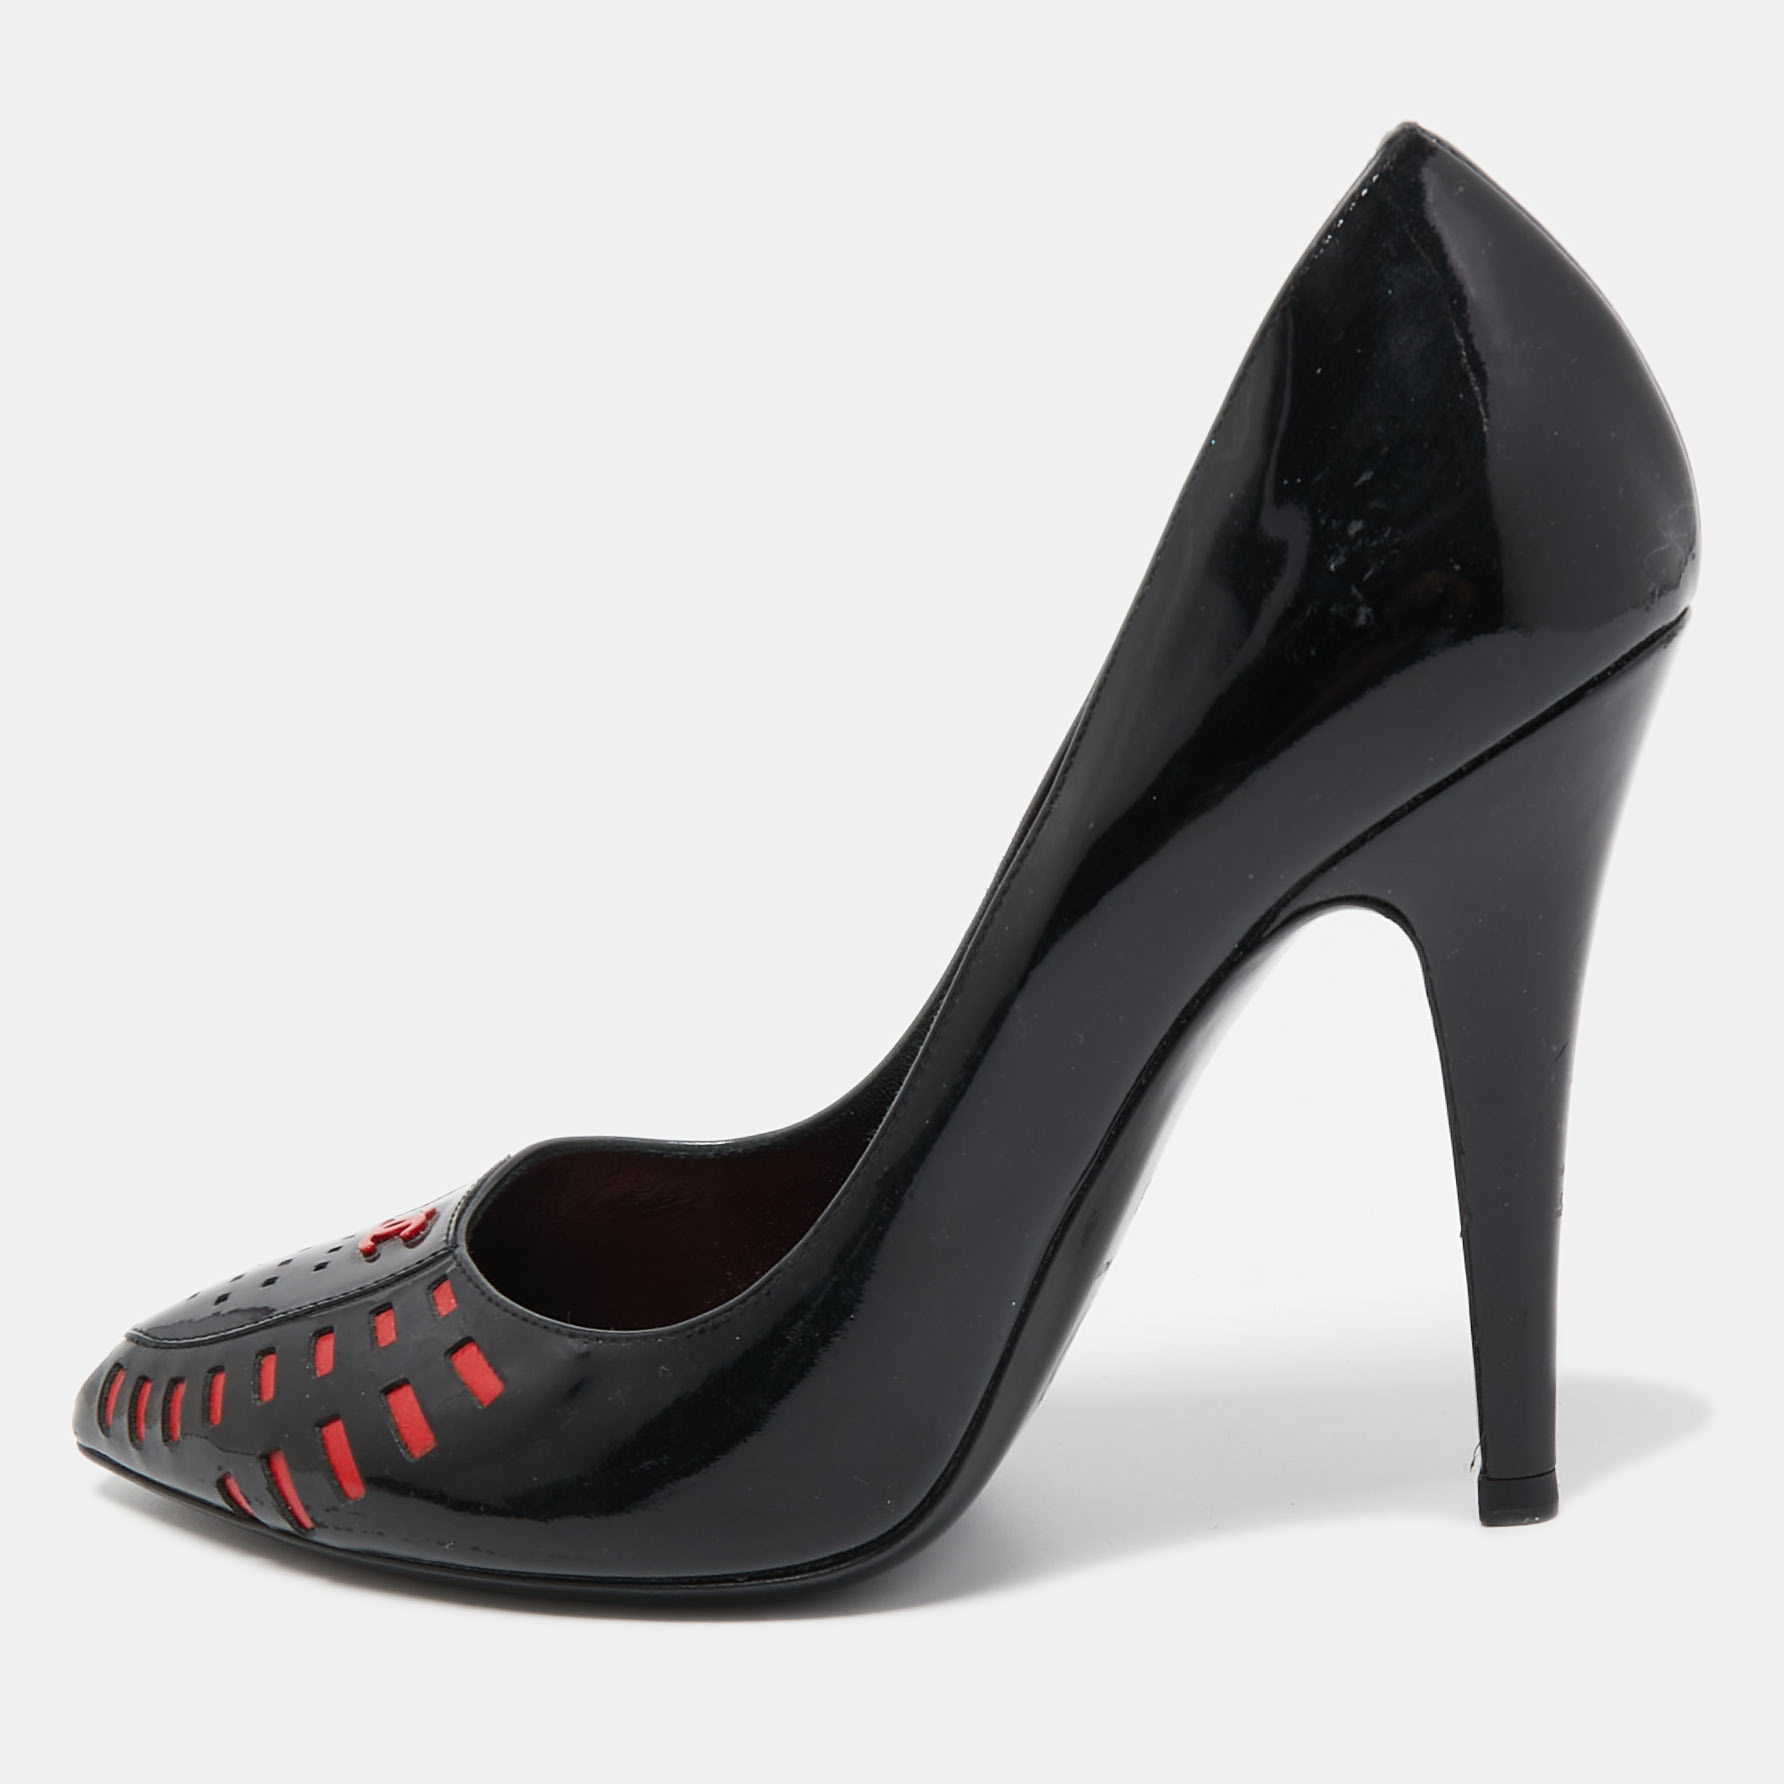 Chanel black/red patent pointed toe pumps size 38